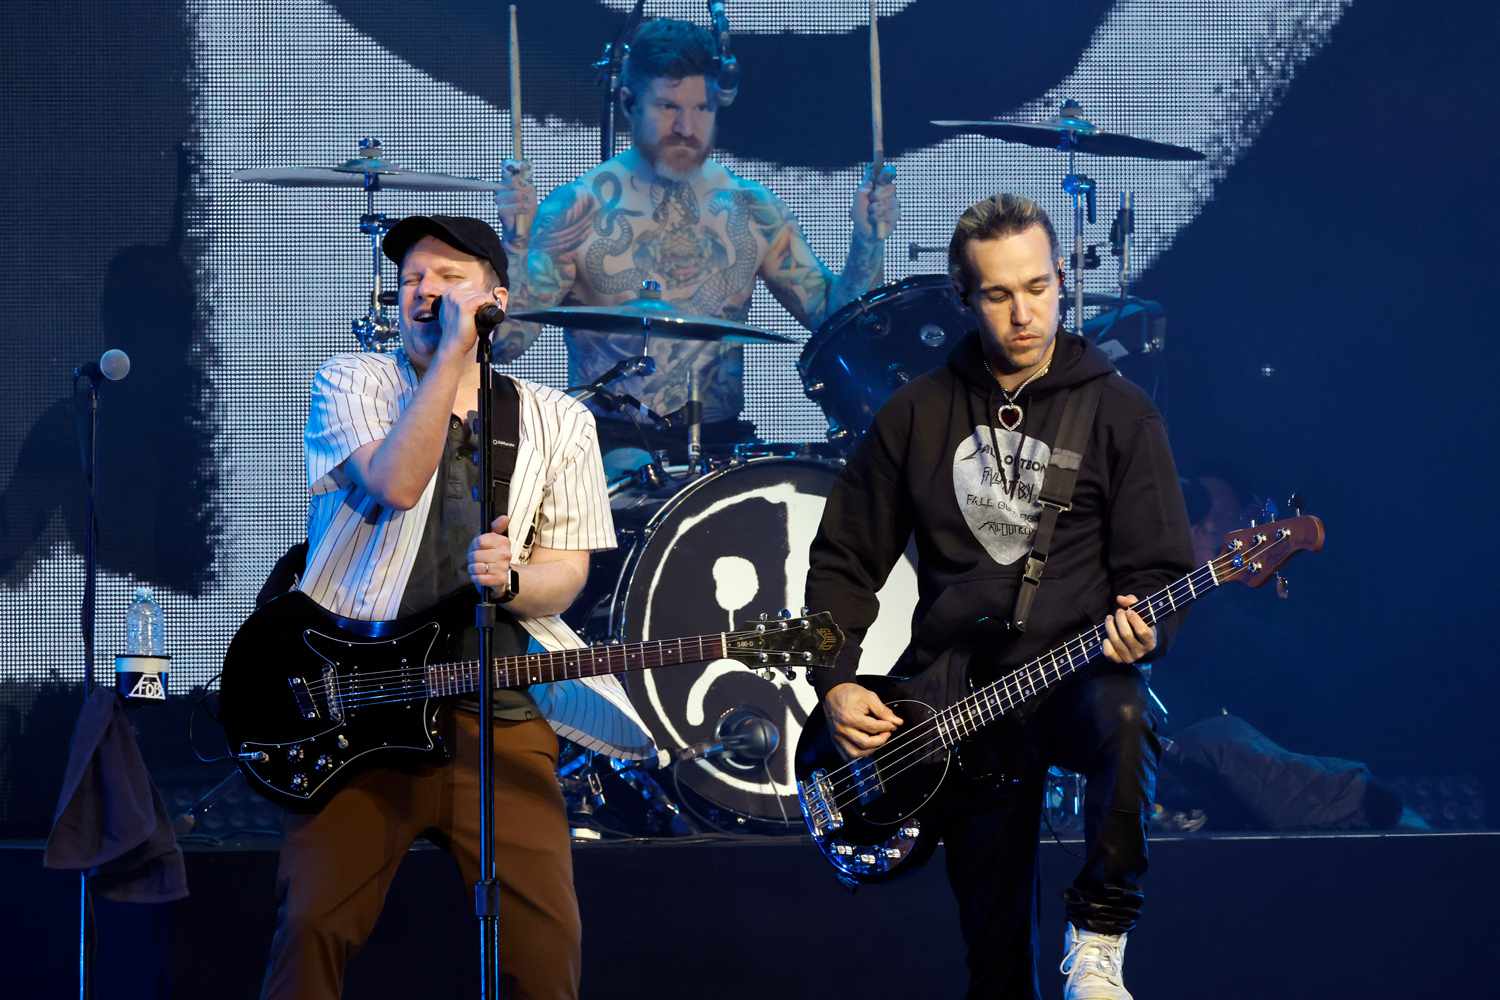 Patrick Stump, Andy Hurley, and Pete Wentz of Fall Out Boy perform onstage at the 2023 iHeartRadio ALTer EGO Presented by Capital One at The Kia Forum on January 14, 2023